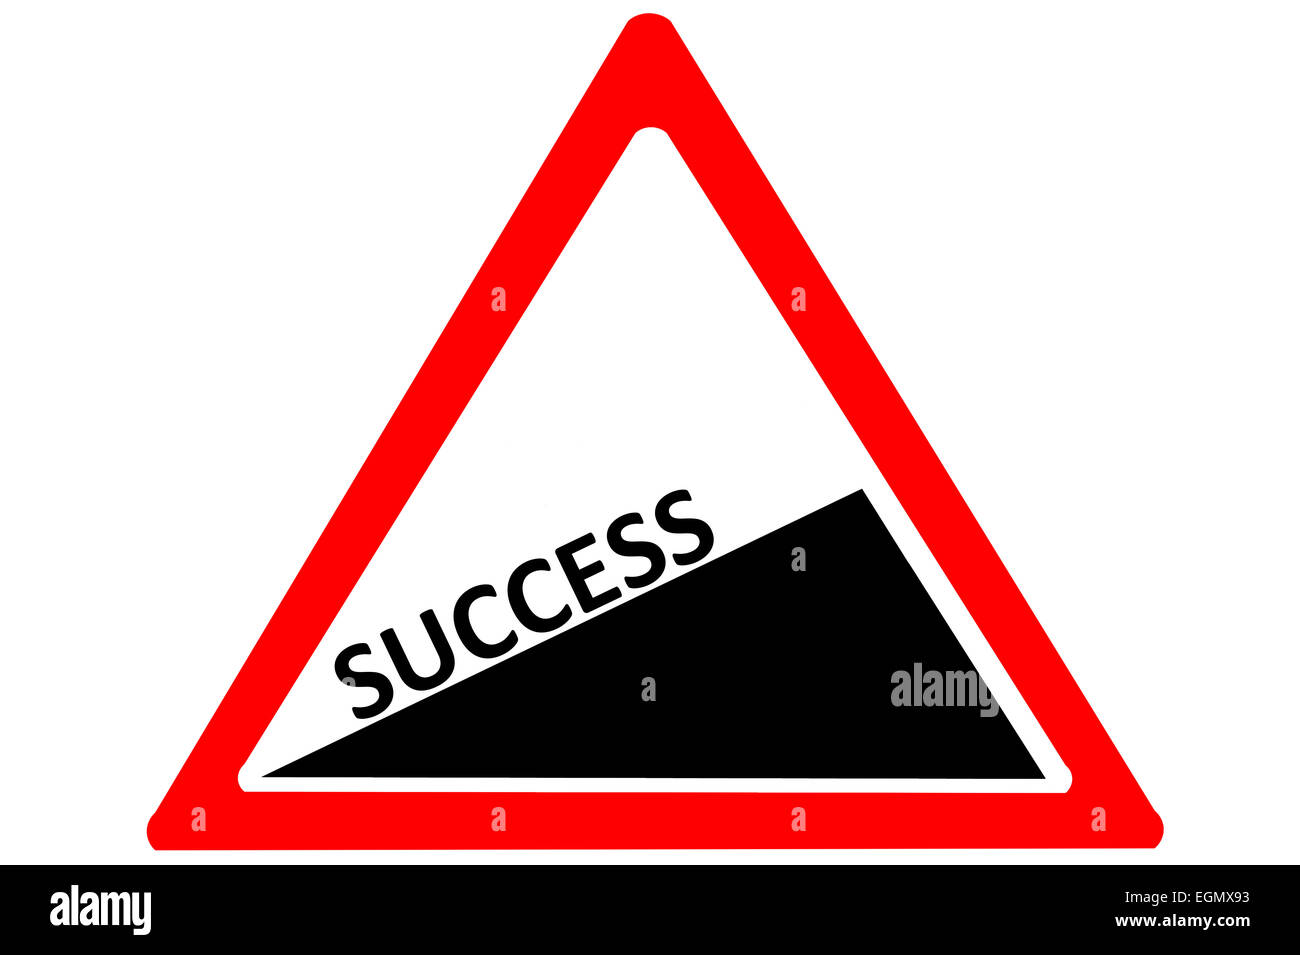 Success increasing warning road sign isolated on white background Stock Photo